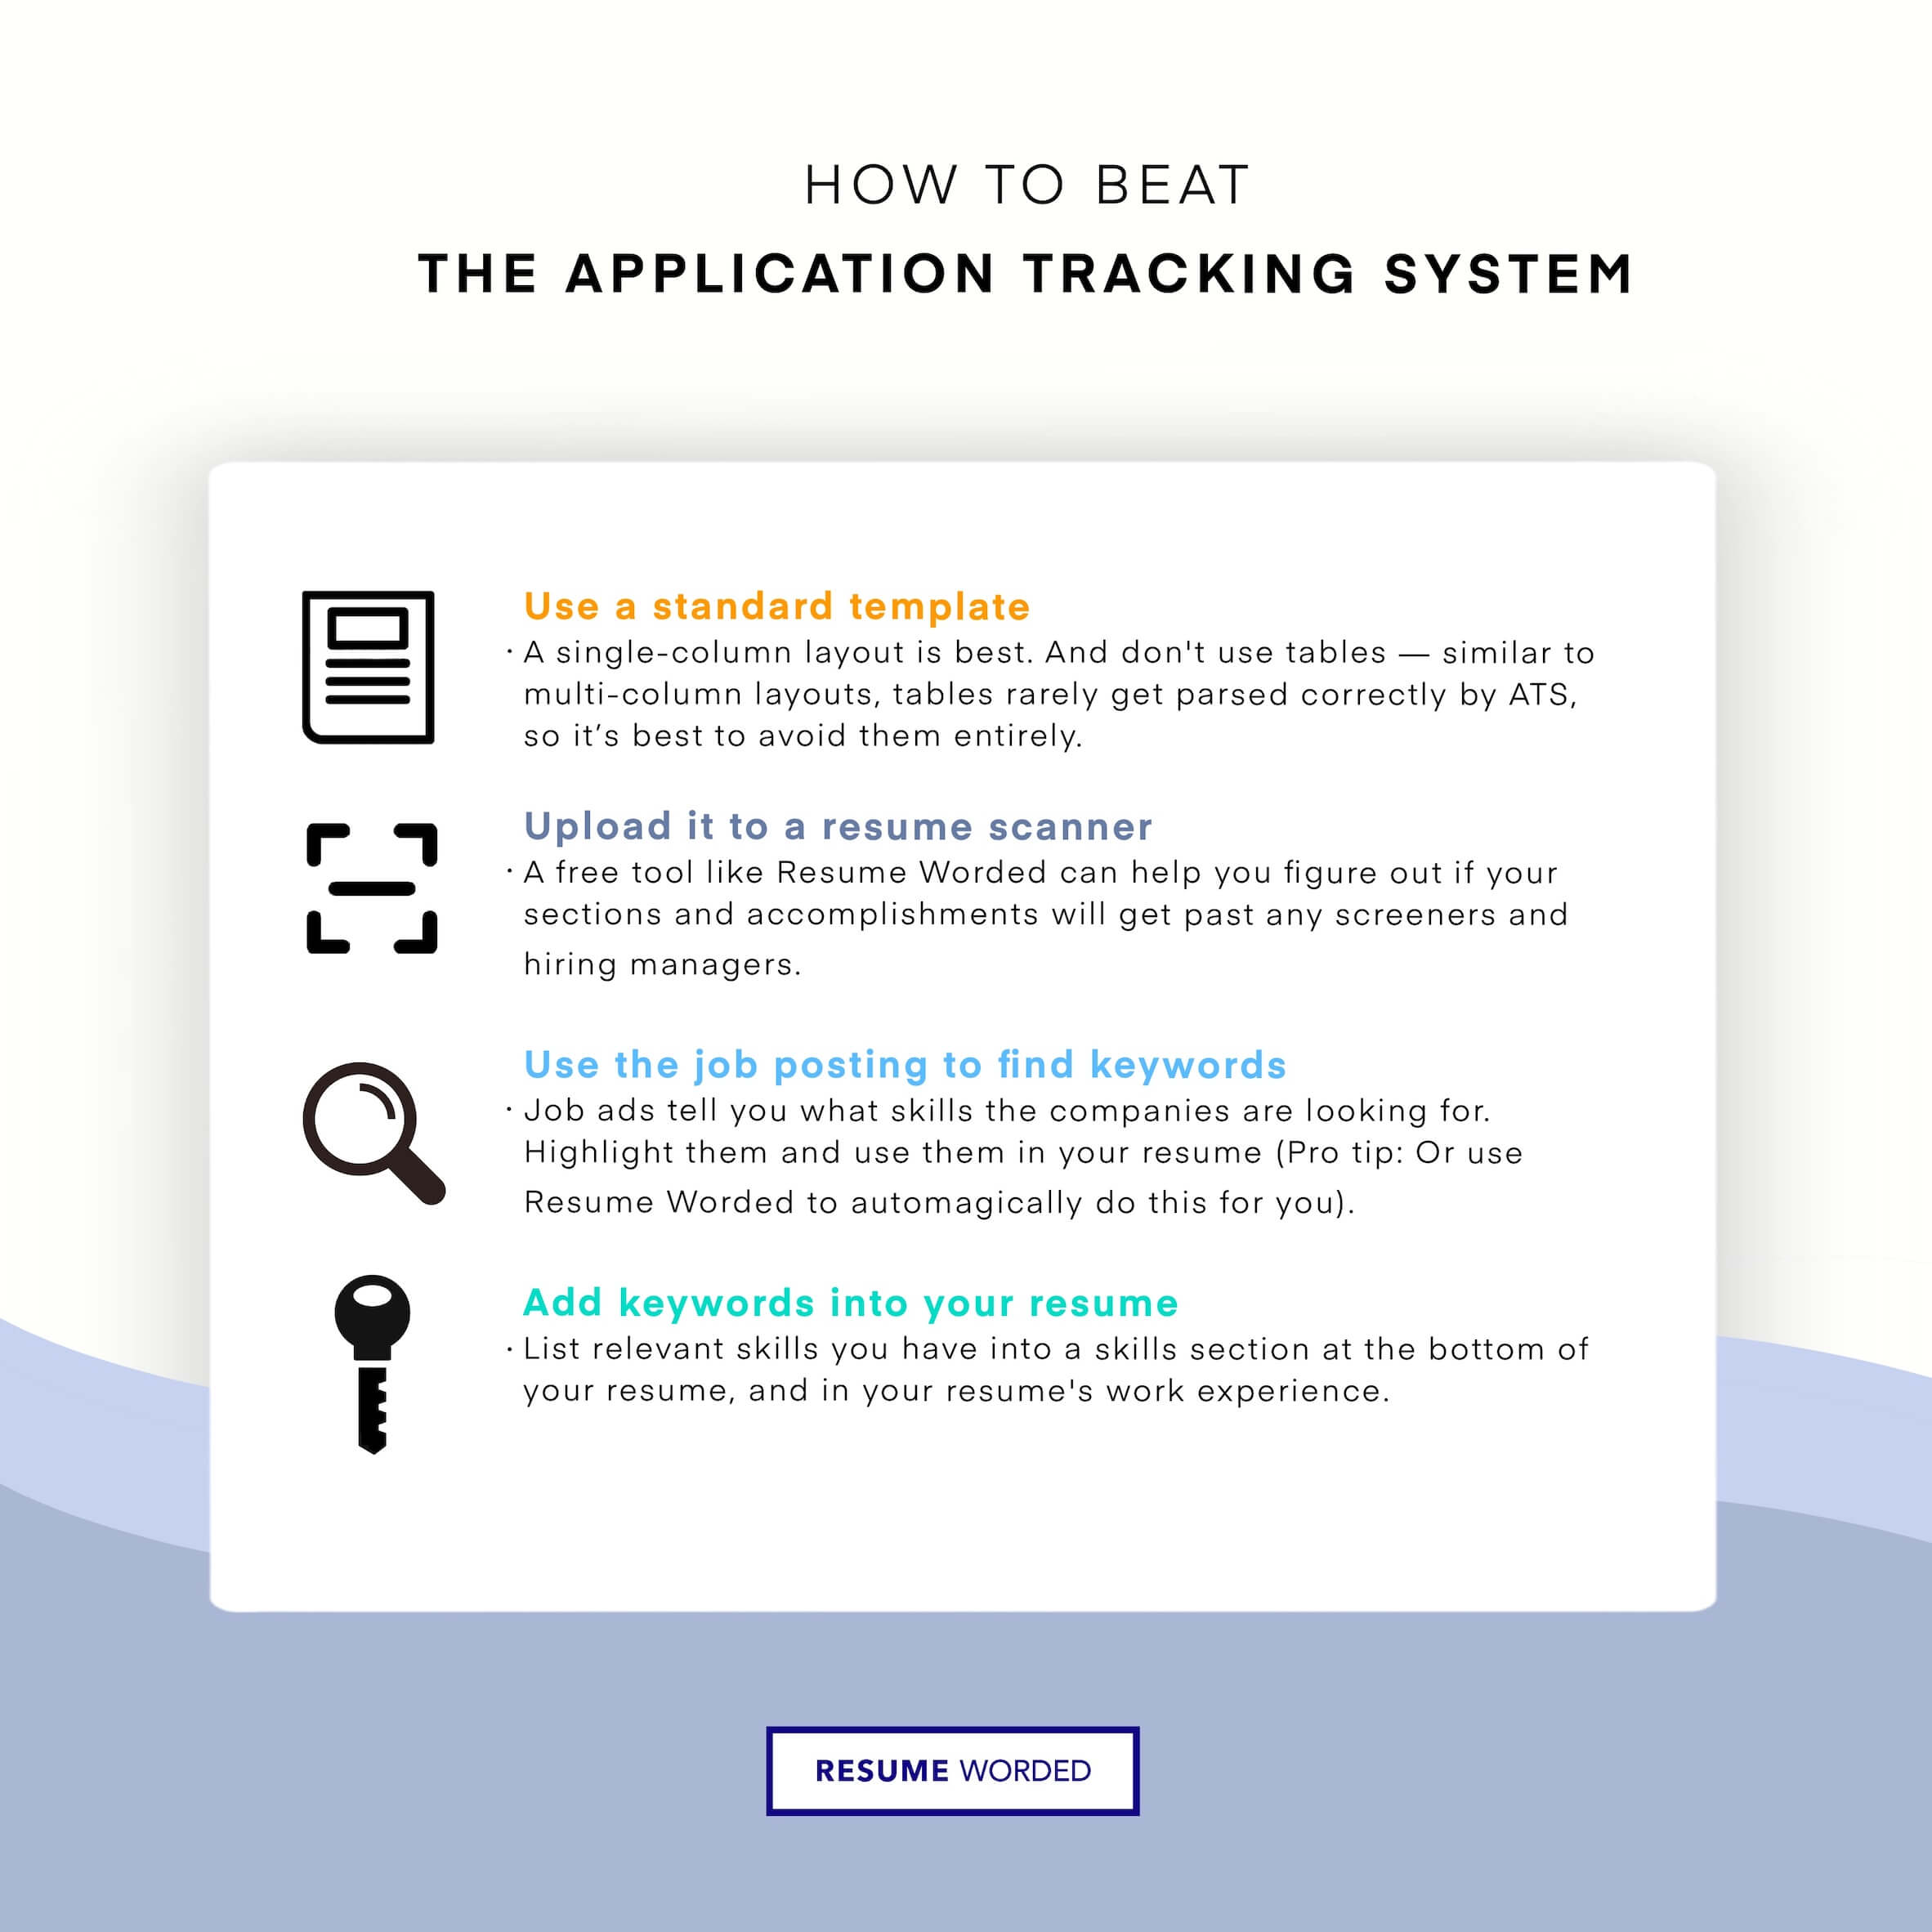 A checklist to beat the applicant tracking system